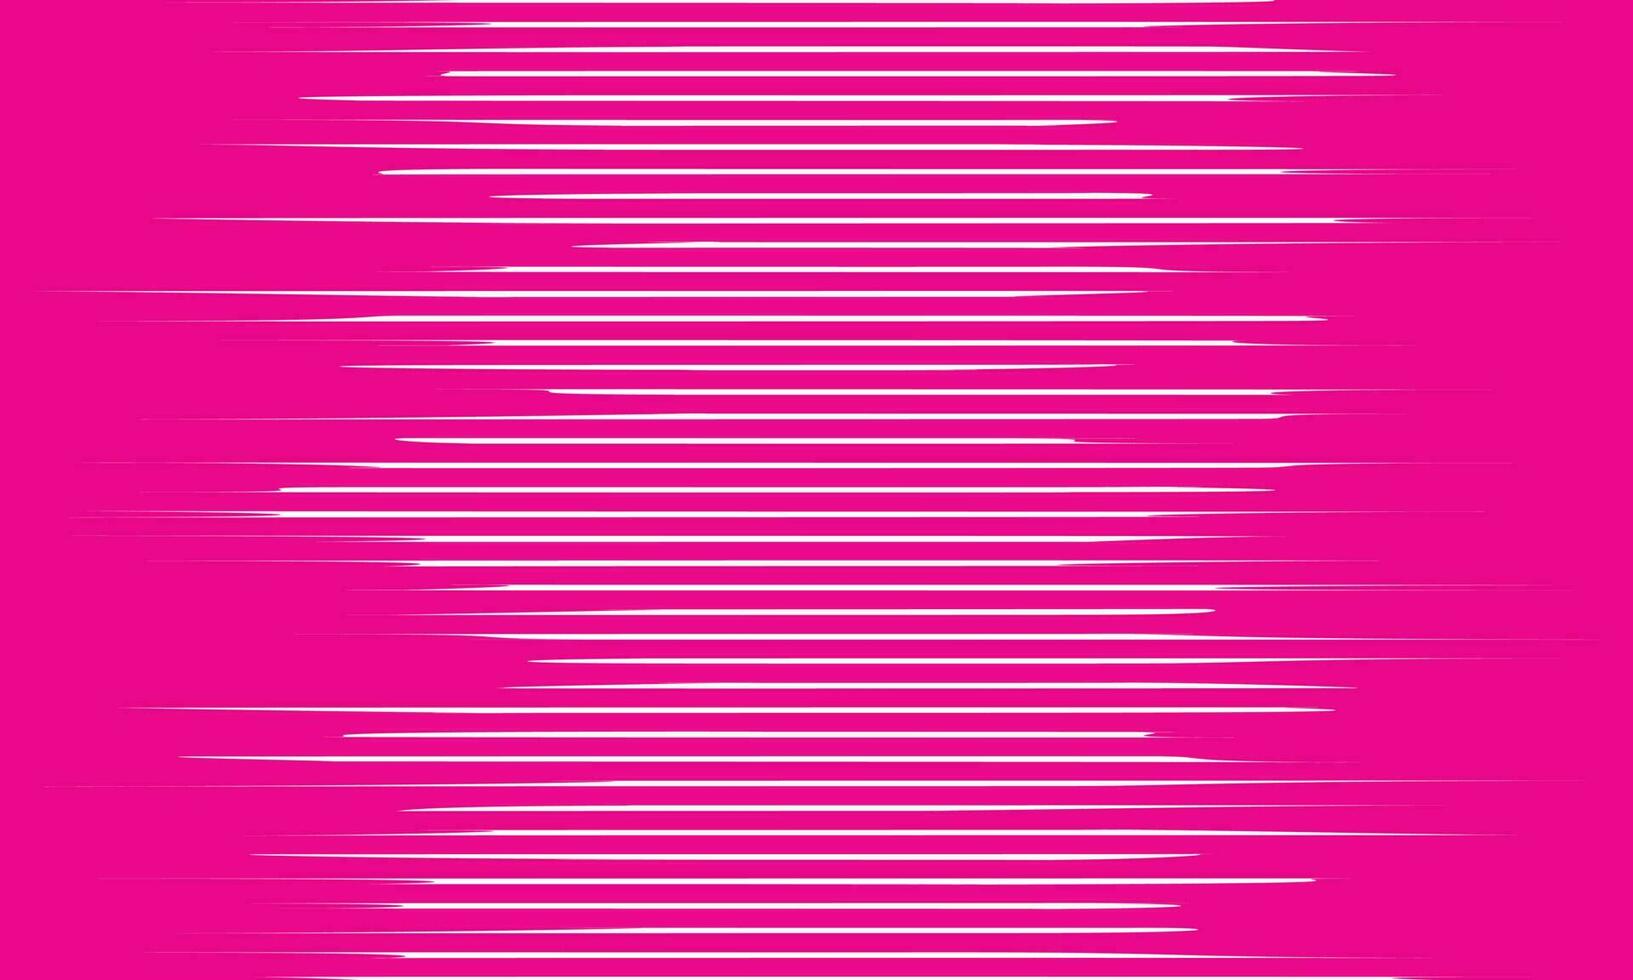 abstract seamless horizontal speed line pattern with pink bg. vector